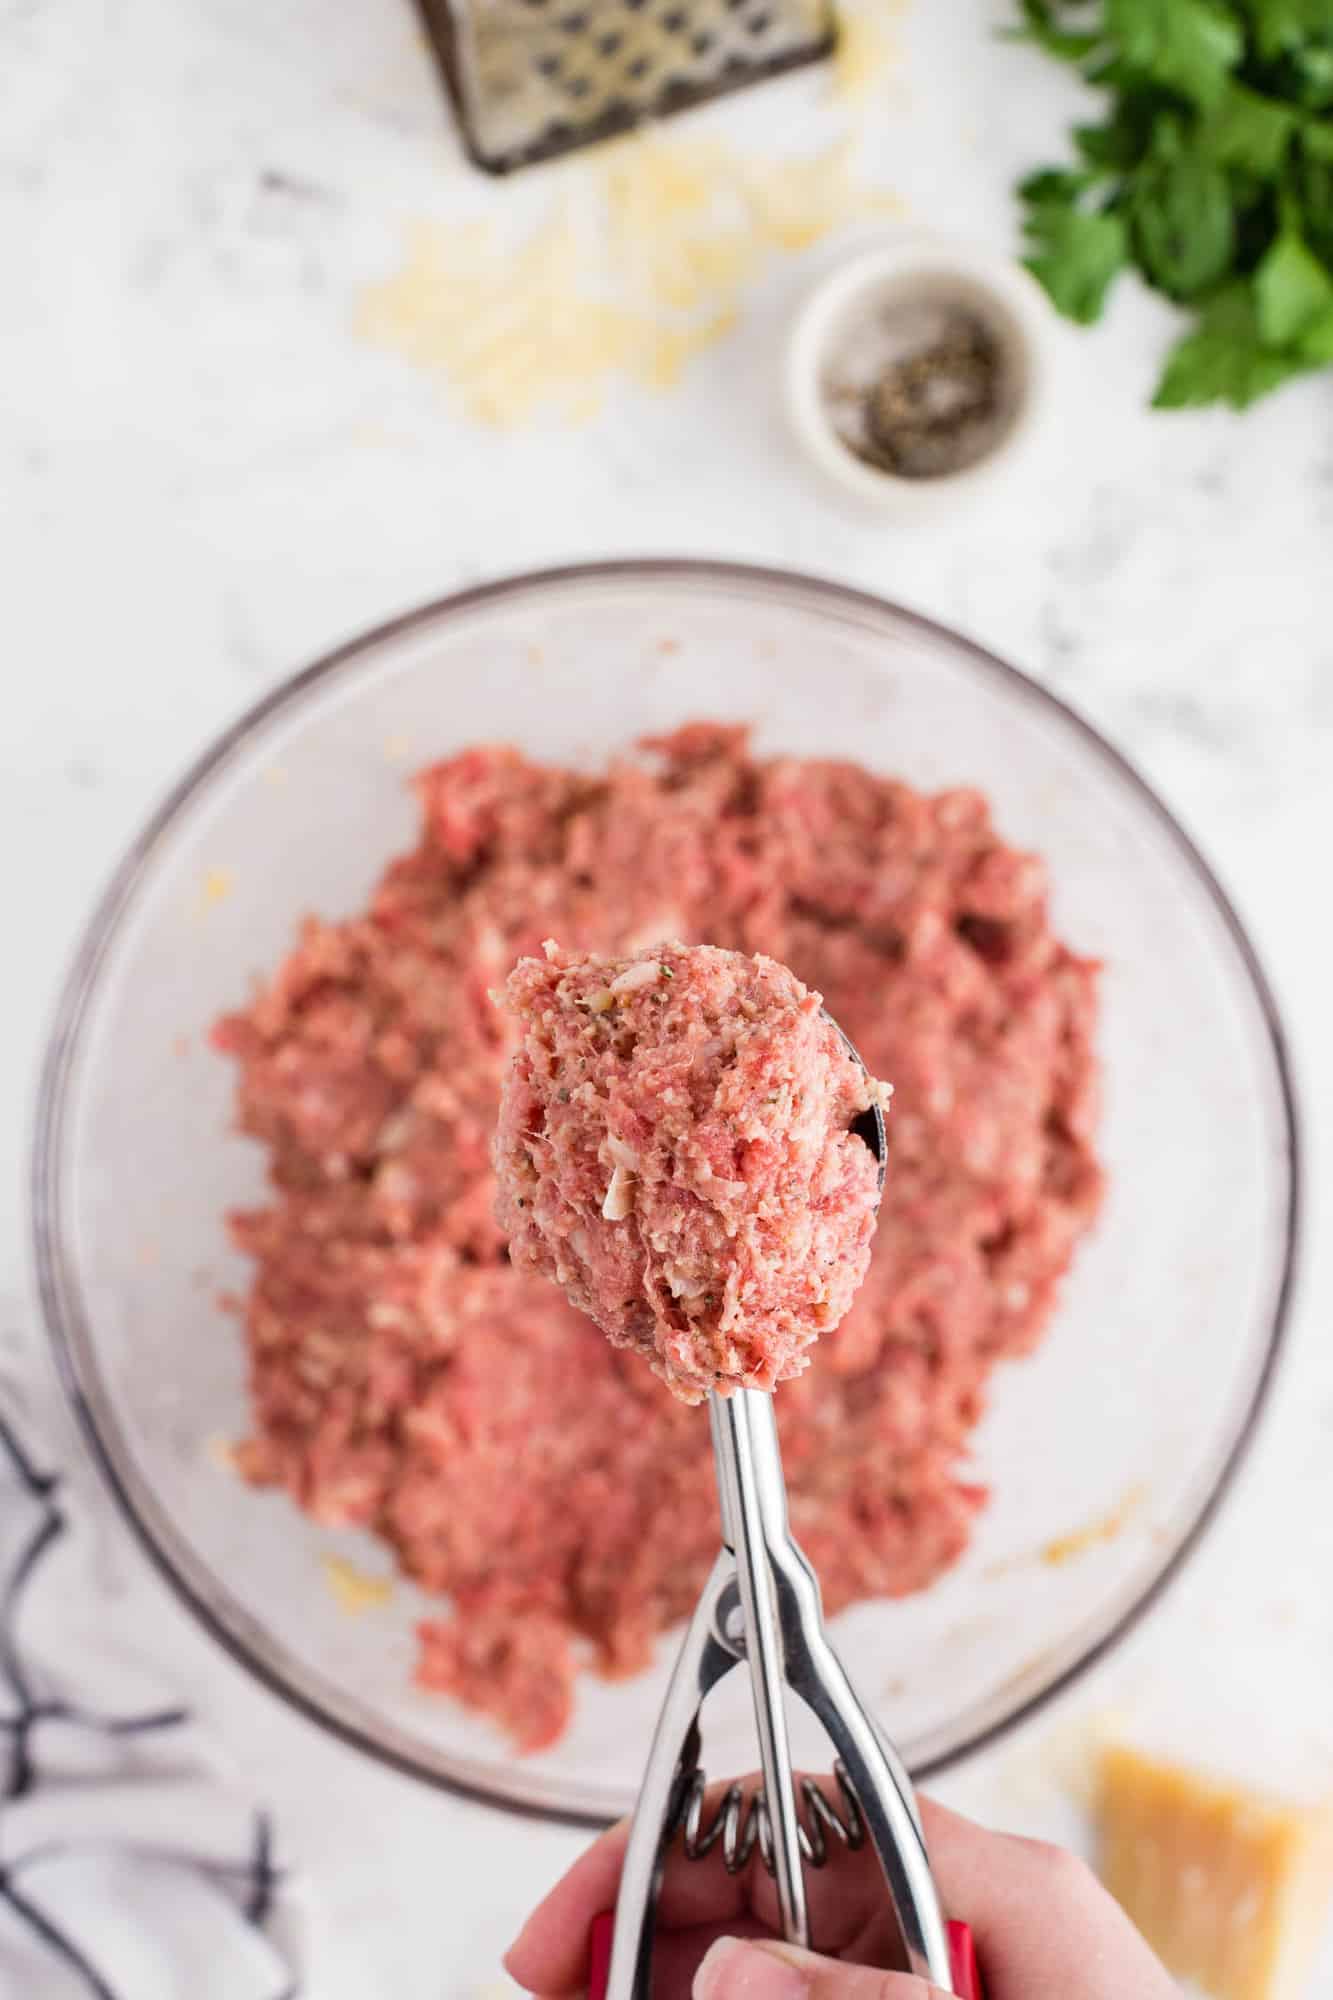 Uncooked ground meat in a scoop.